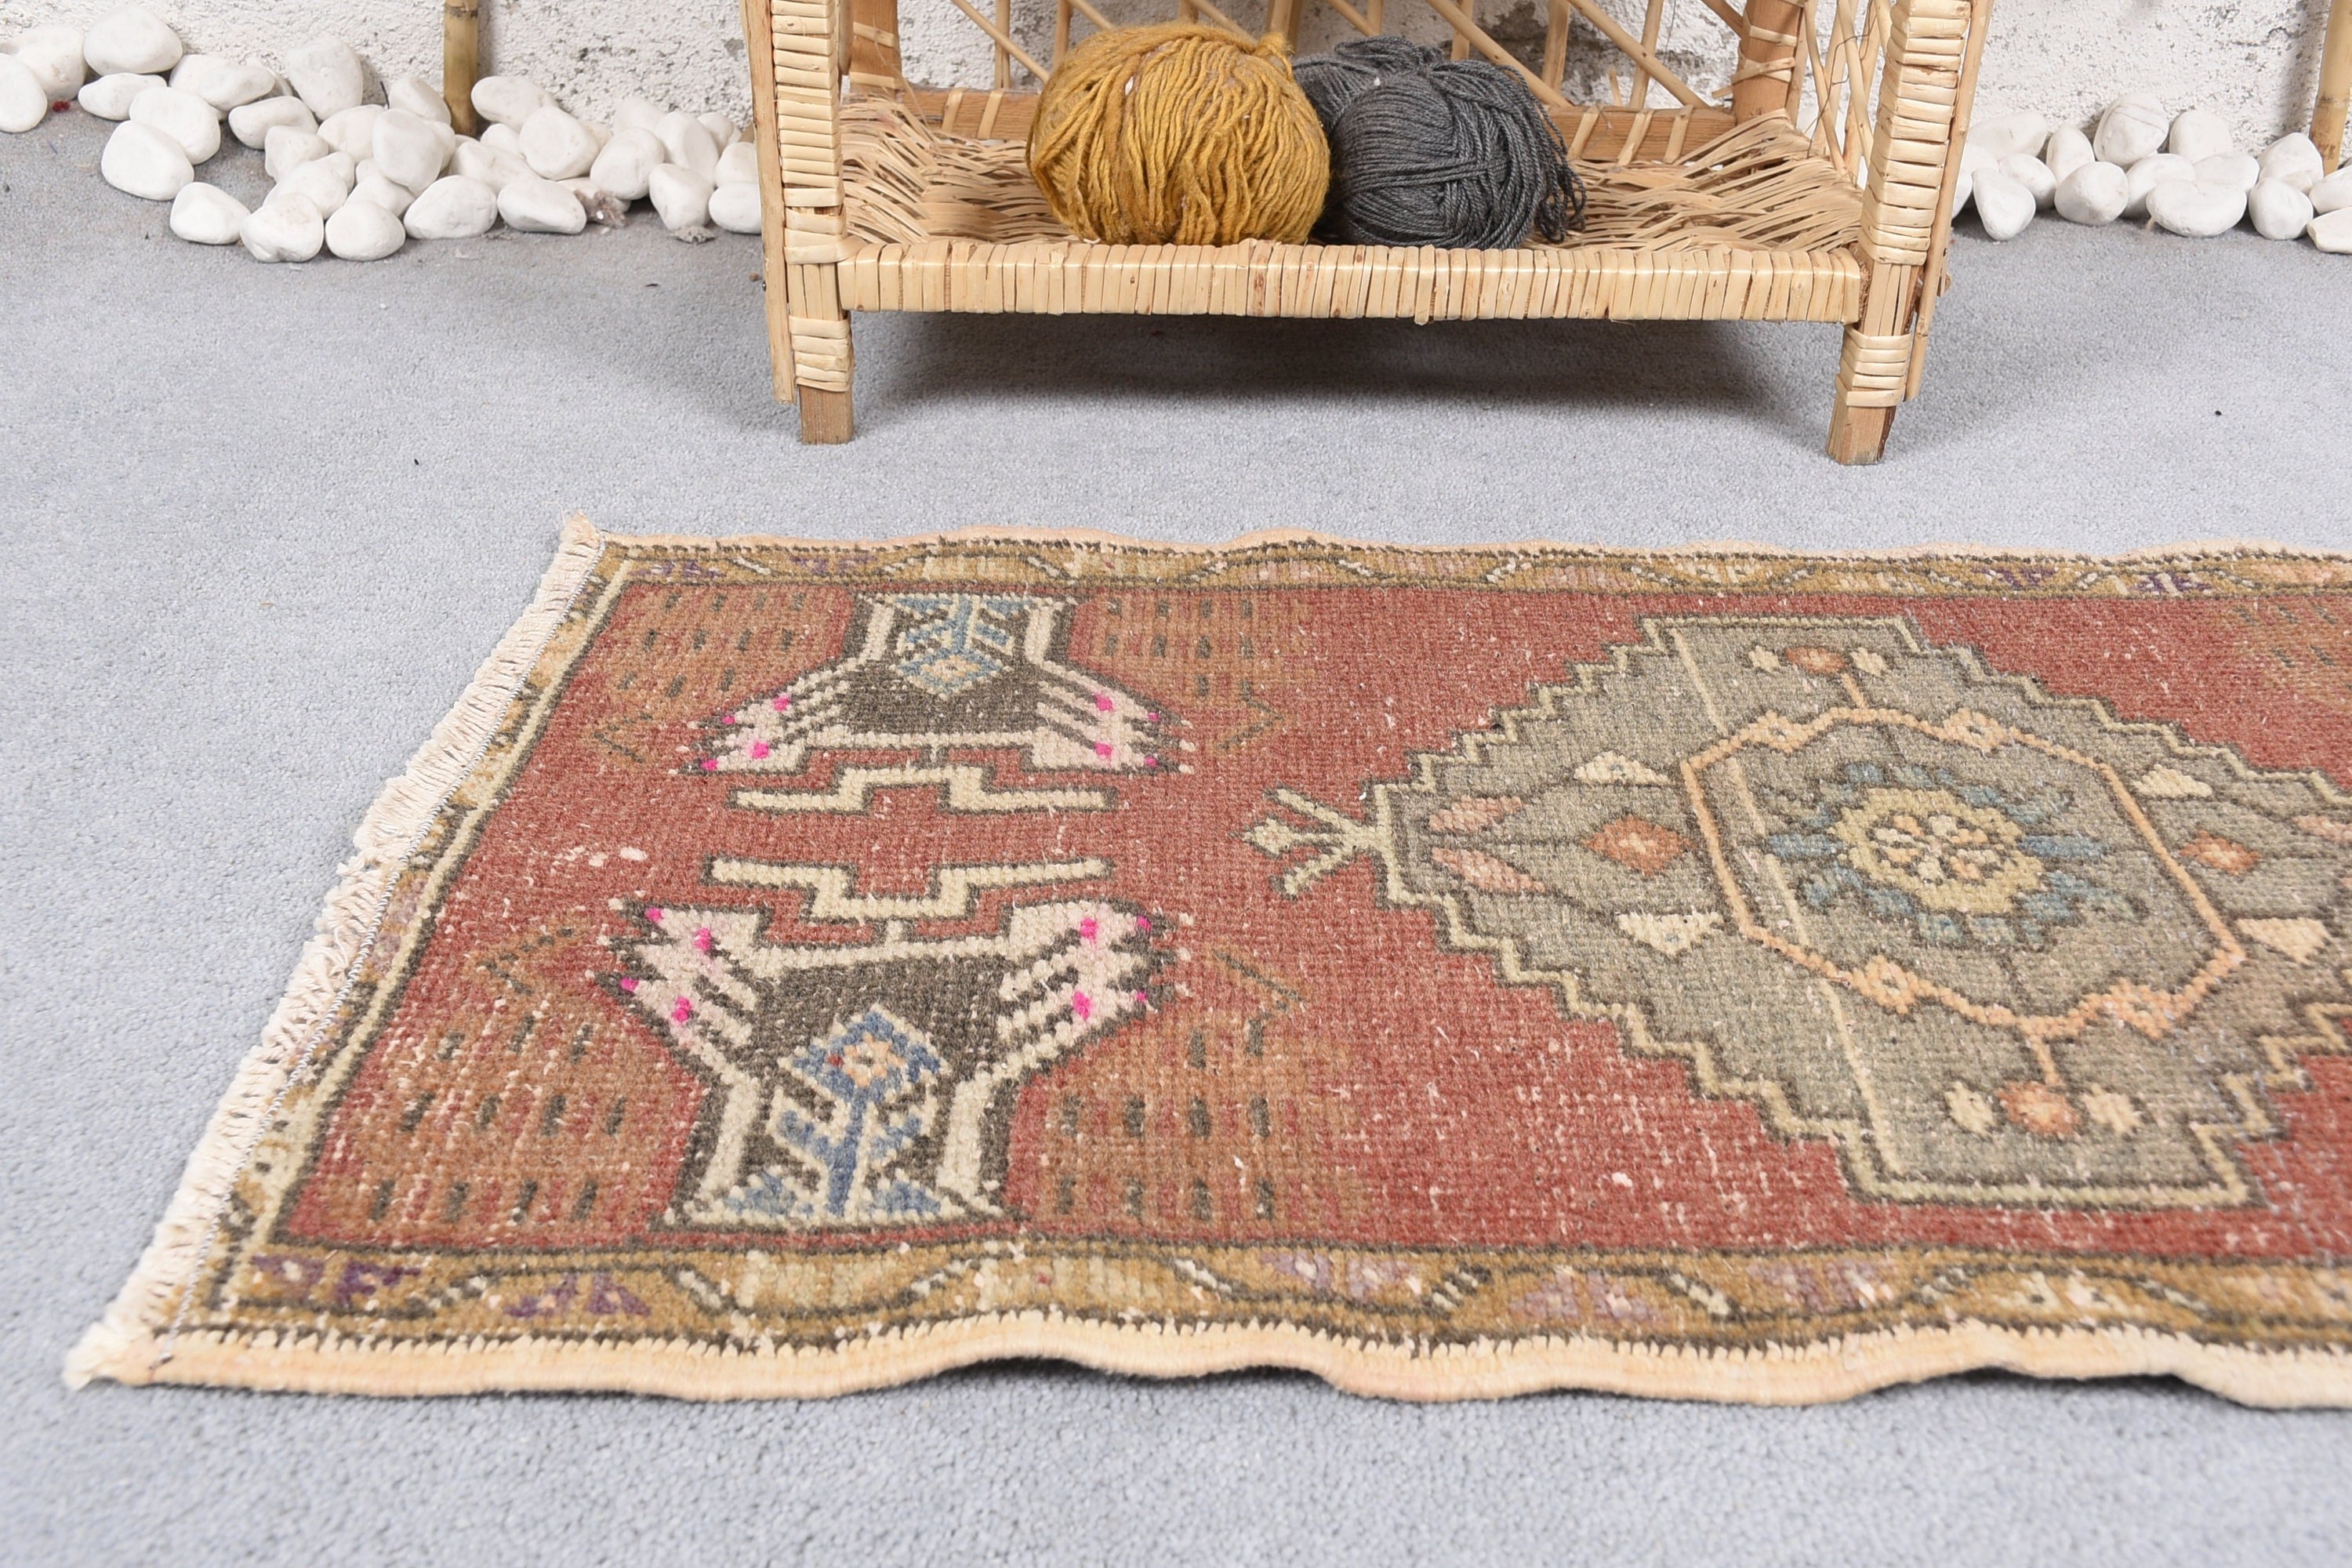 Wall Hanging Rugs, Oriental Rug, Rugs for Kitchen, Red Cool Rugs, Turkish Rug, Vintage Rug, Bedroom Rugs, 1.6x2.9 ft Small Rug, Oushak Rug